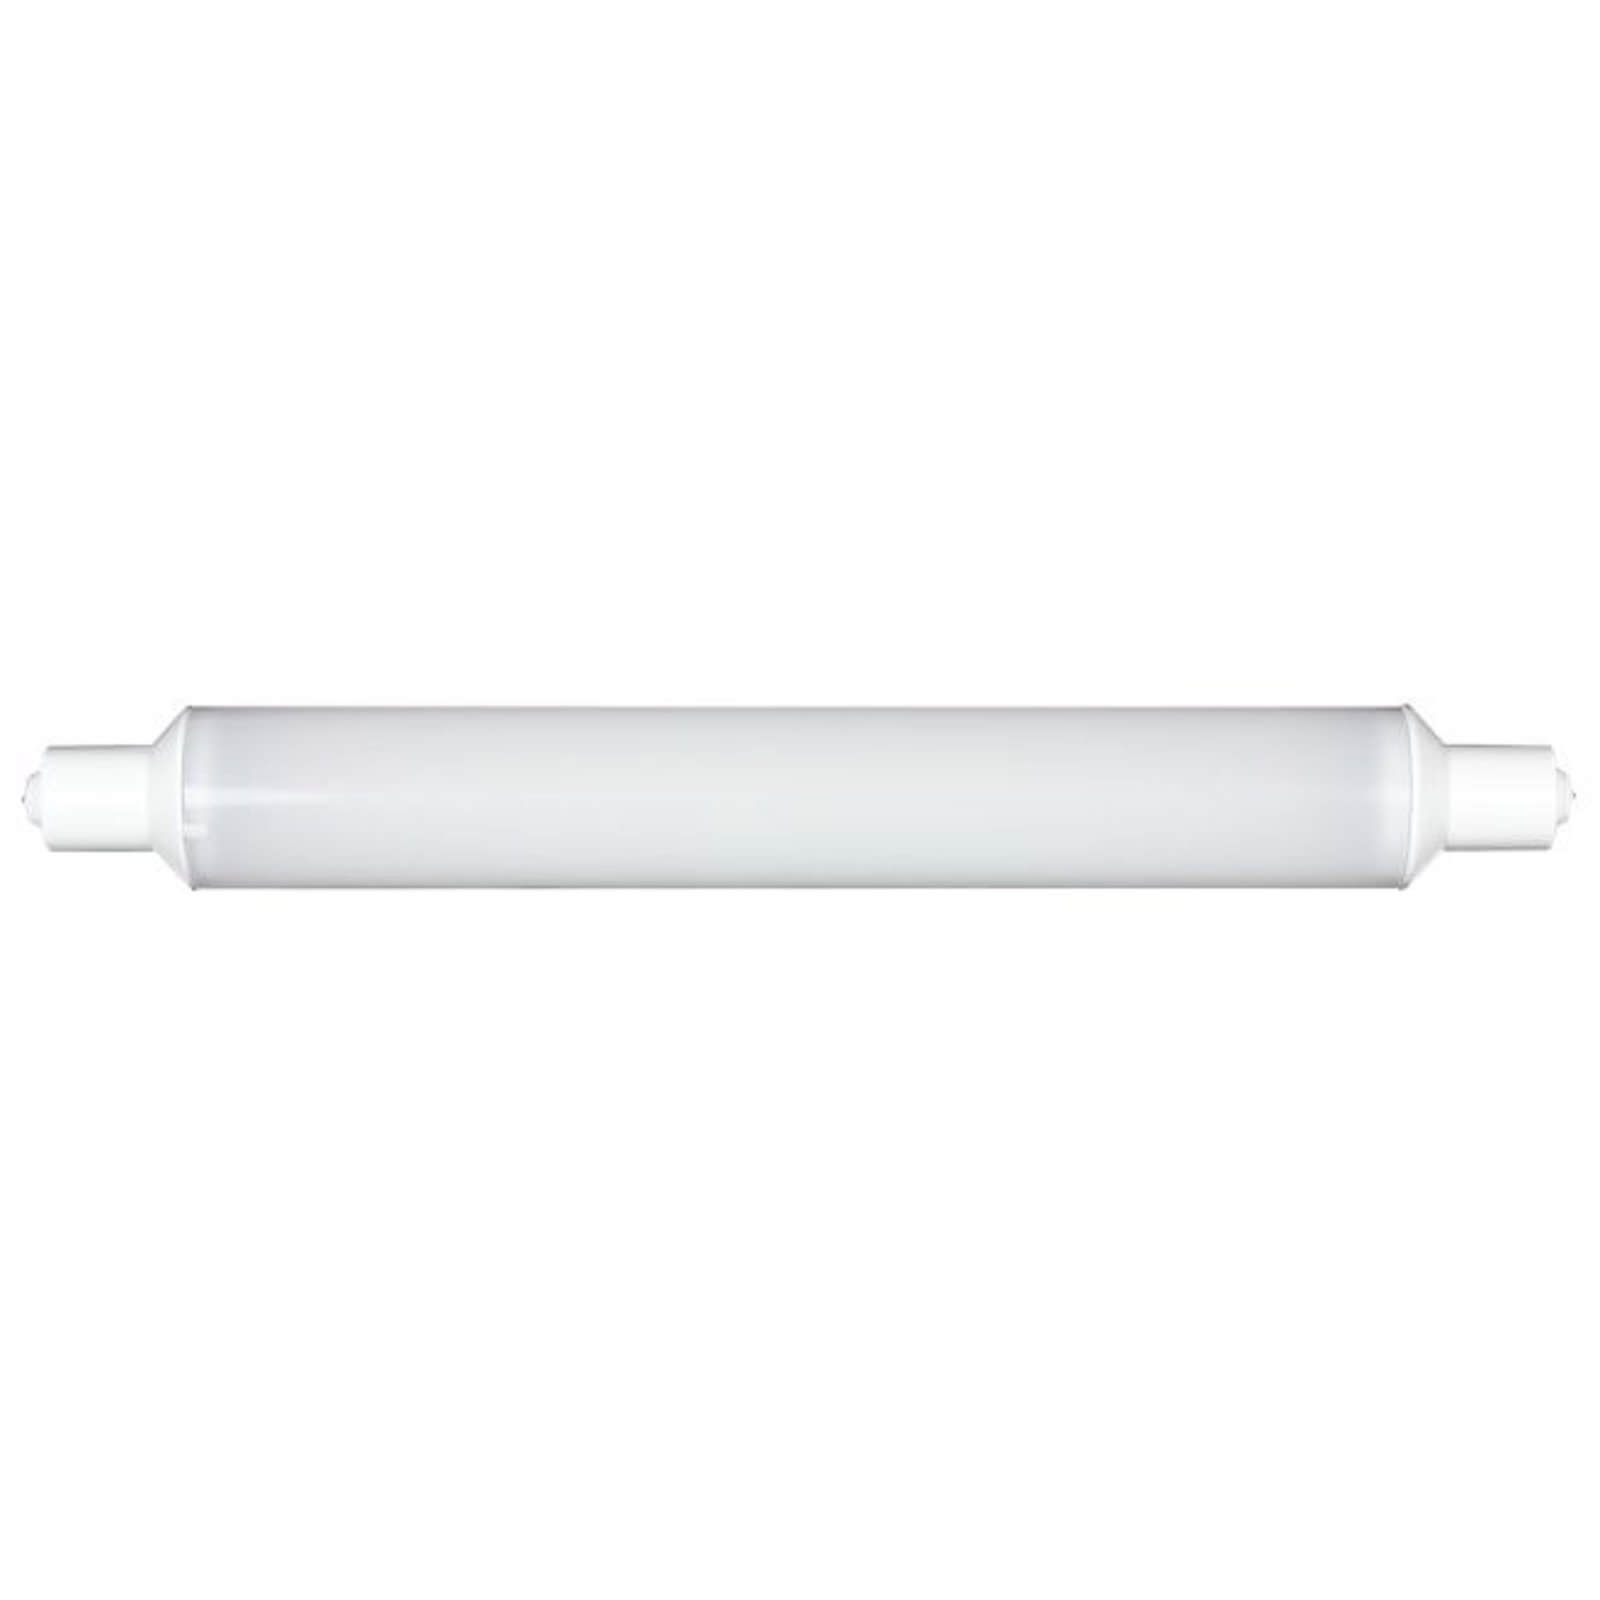 Photo of Led Frosted Striplight 284mm 5w Light Bulb